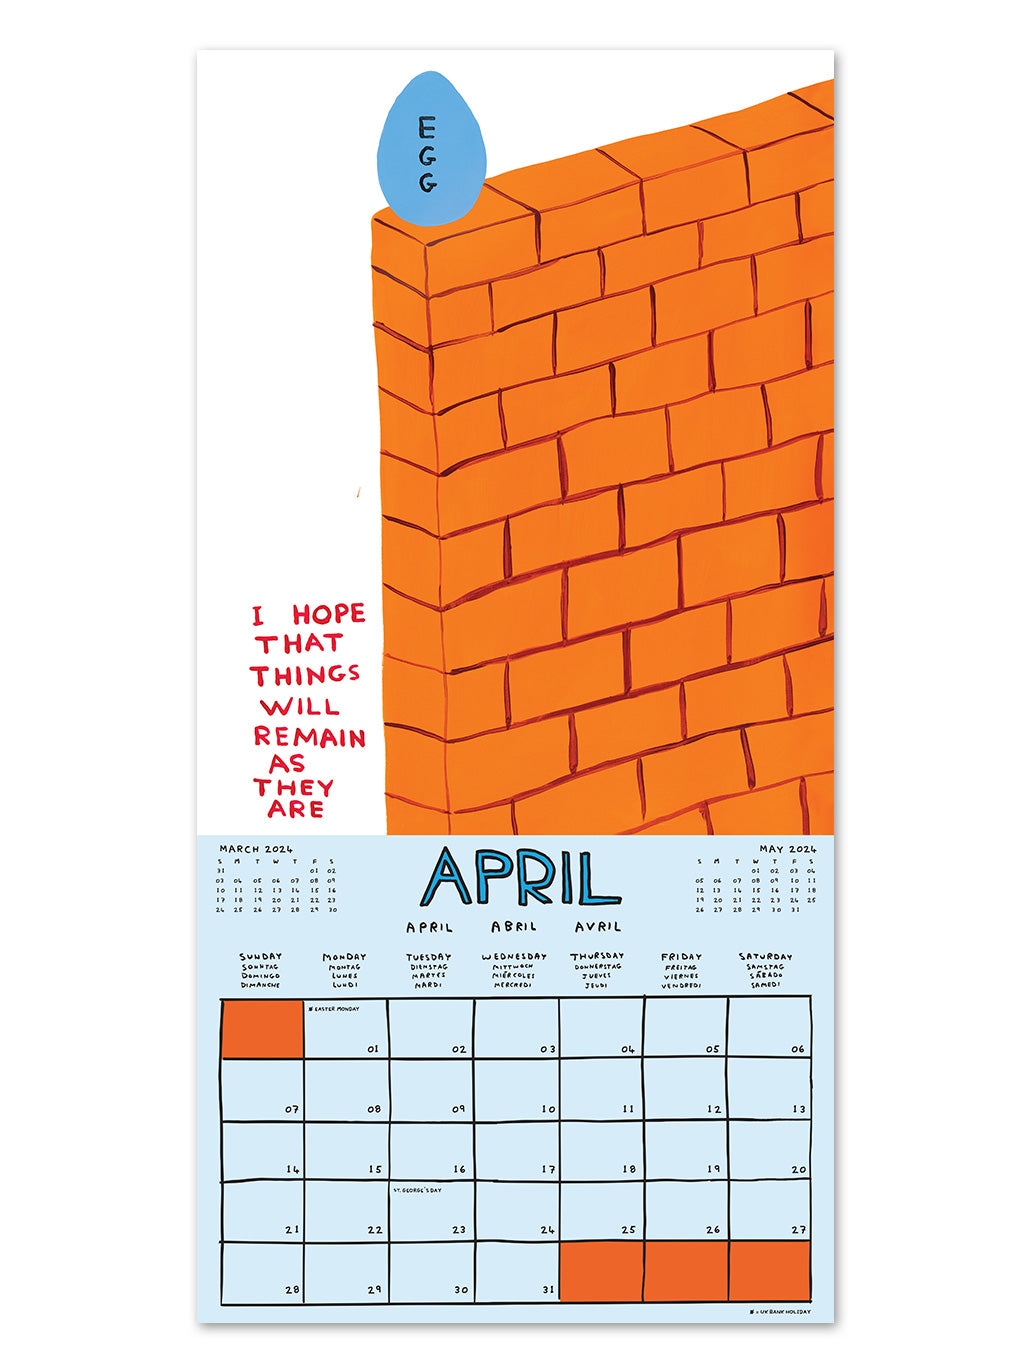 An example of the layout of a 2024 calendar by artist David Shrigley. April shows a light blue calendar section with a box allocated to each day of the month. The artwork on the top half of the page has a white background and shows an egg perched on an brown brick wall with the words - i hope that things will remain as they are.